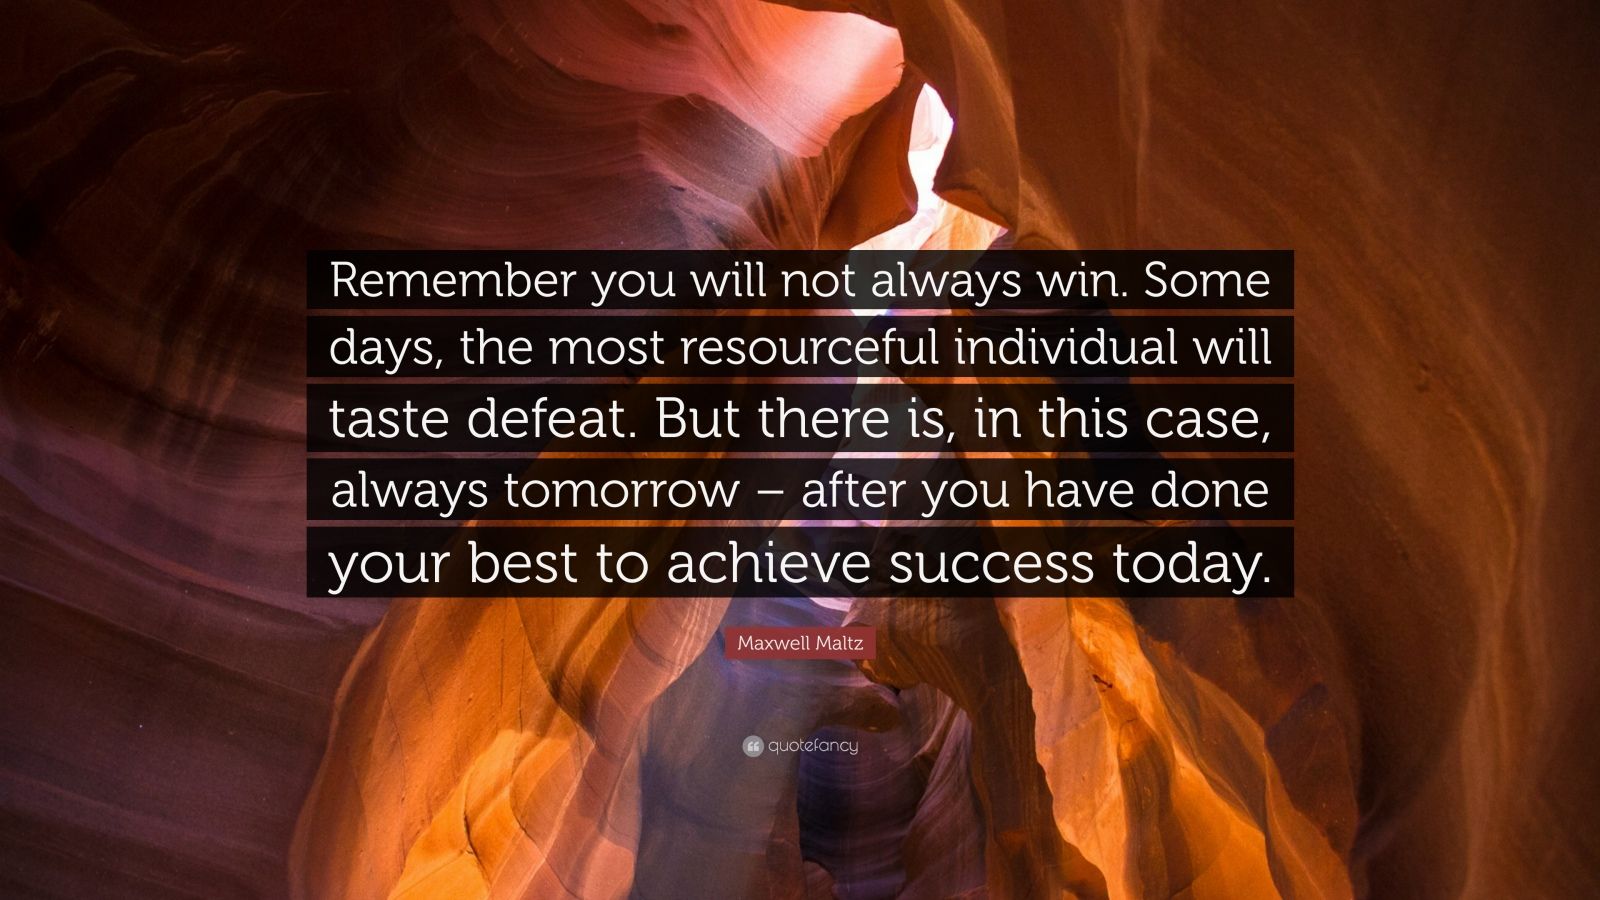 Maxwell Maltz Quote “Remember you will not always win Some days the